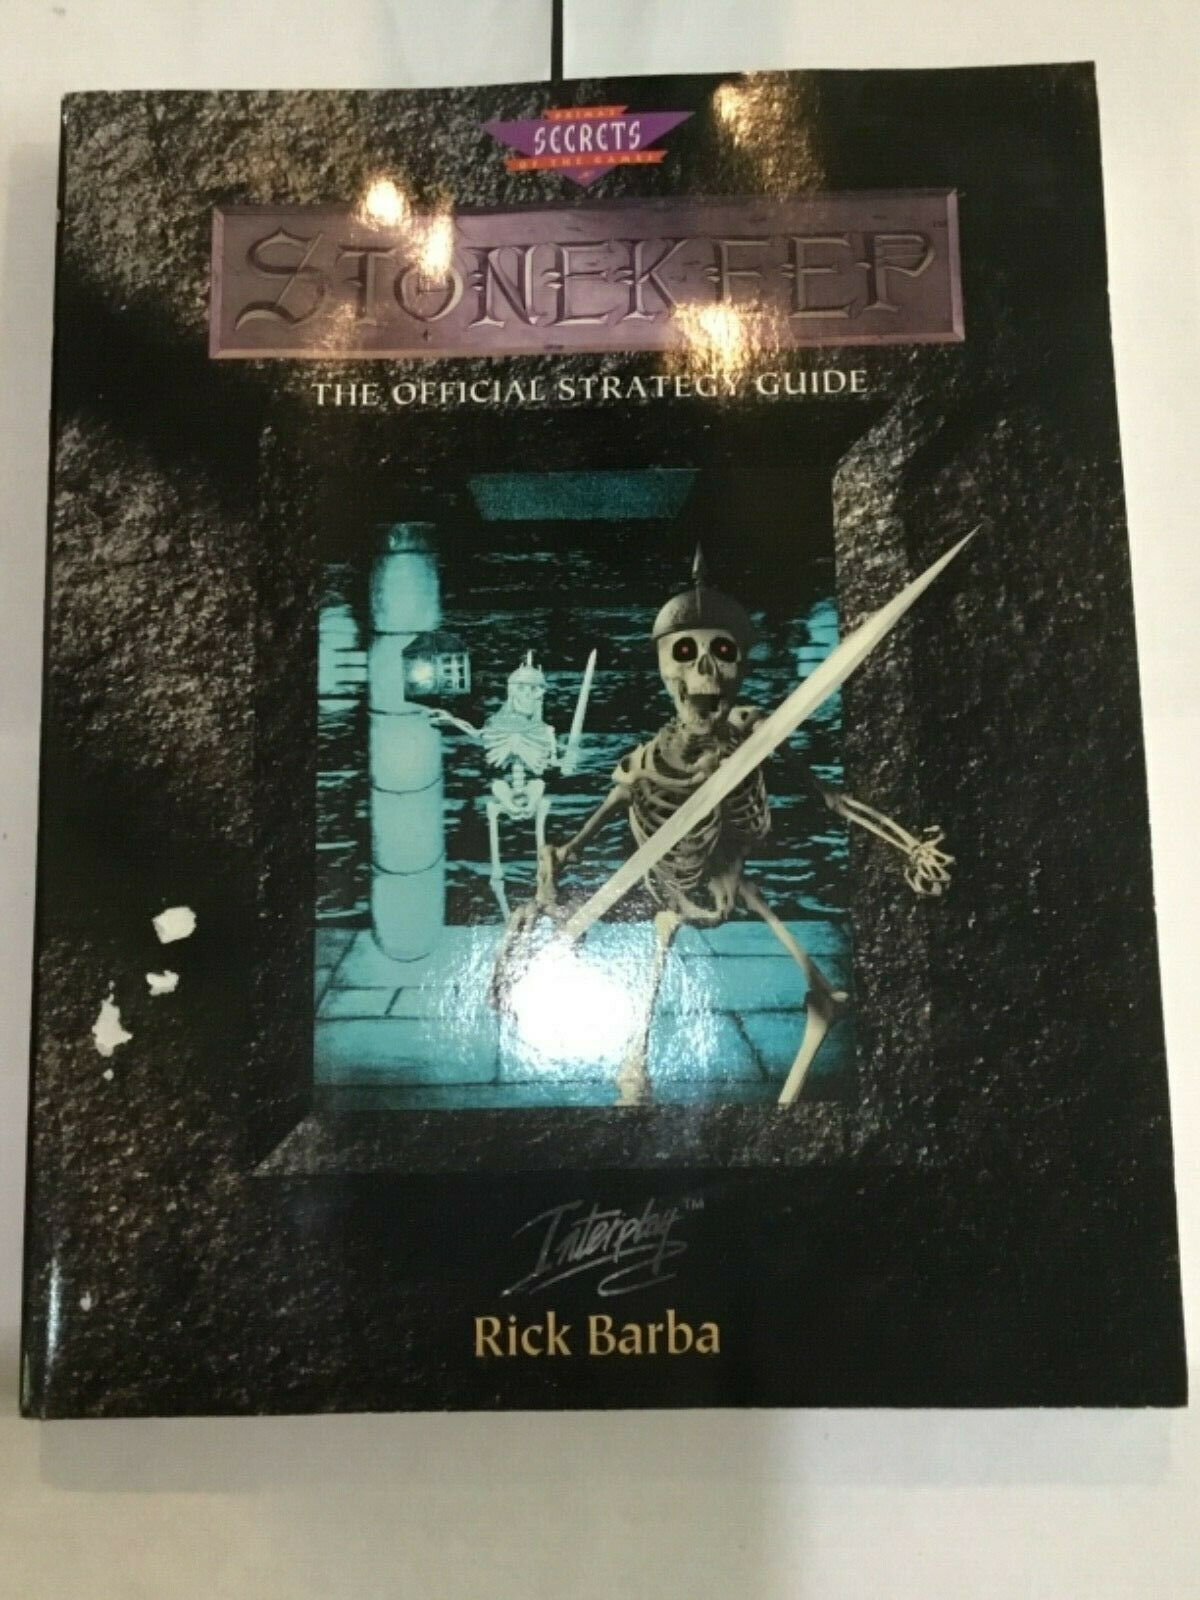 1995 Stonekeep Official Strategy Guide (Secrets of the Game) by Rick Barba